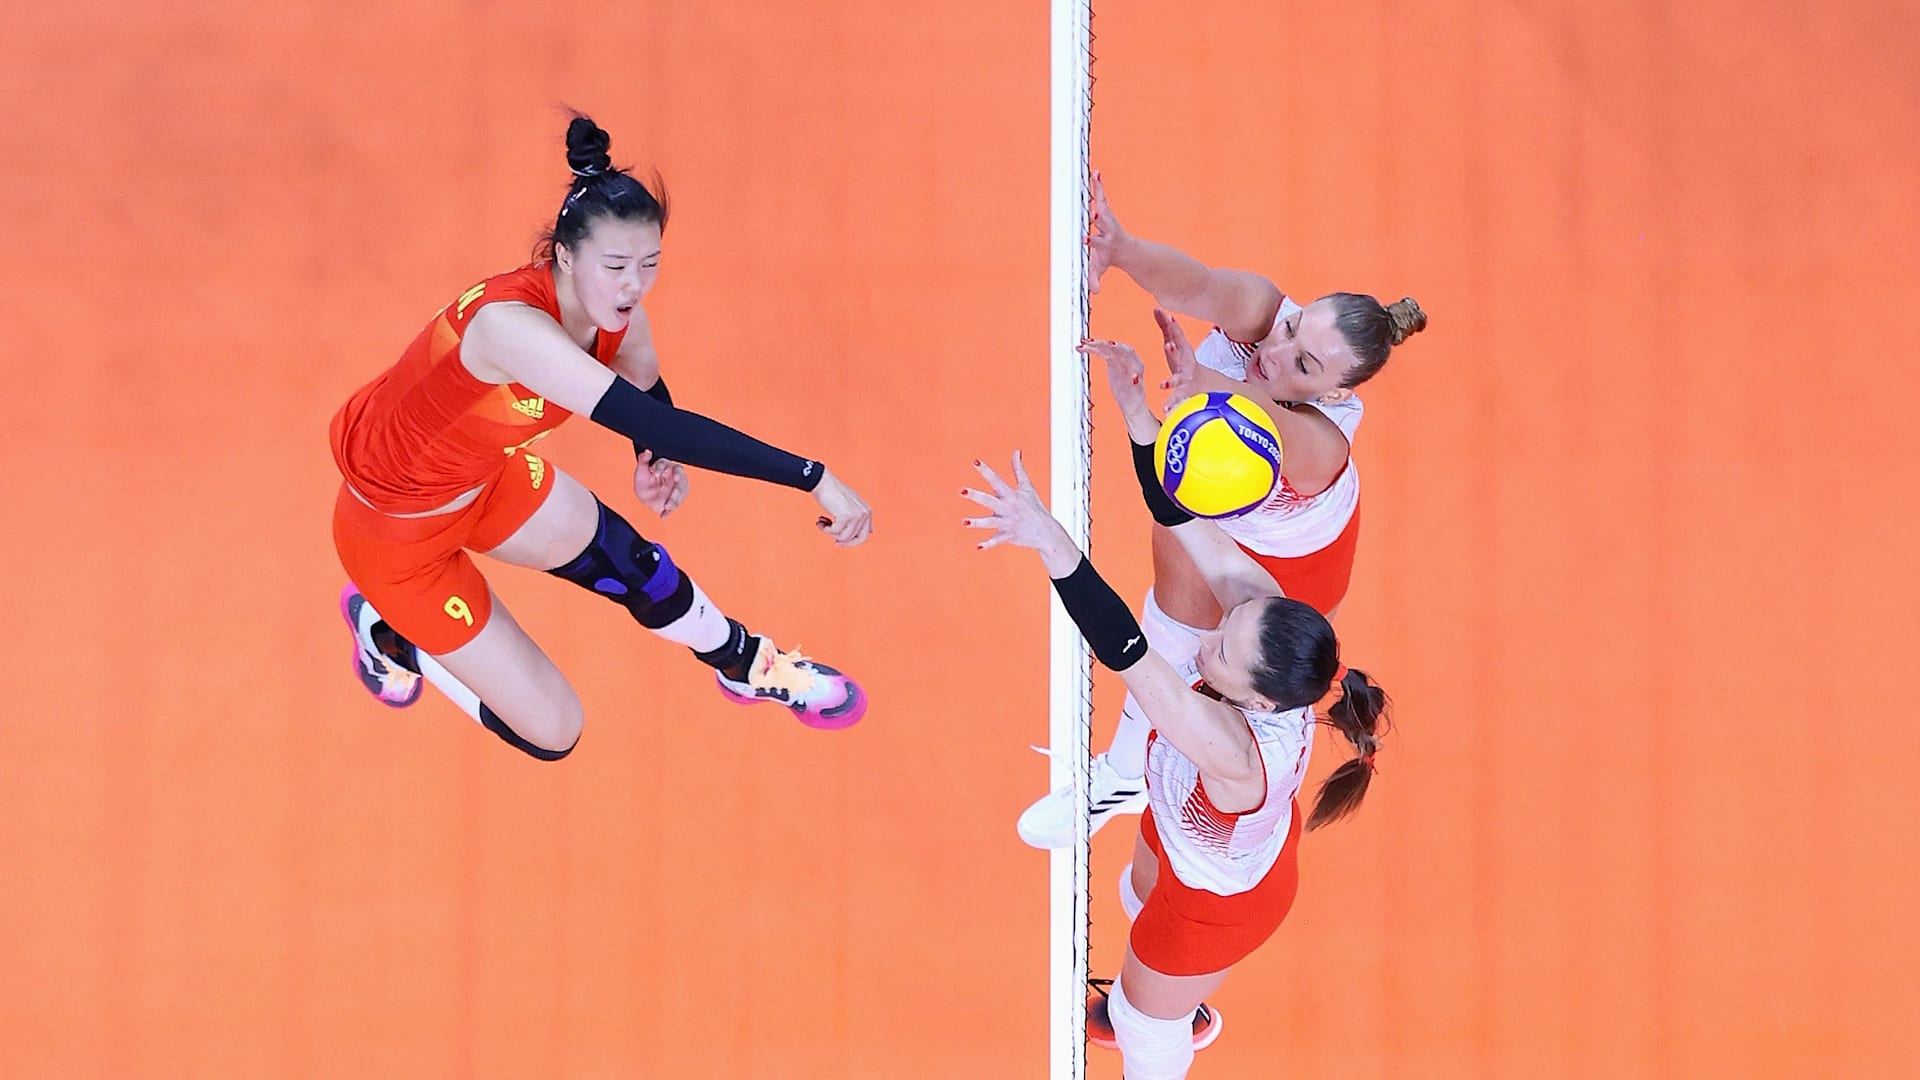 Volleyball at Hangzhou Asian Games 2022 in 2023 Preview, full schedule, how to watch live action